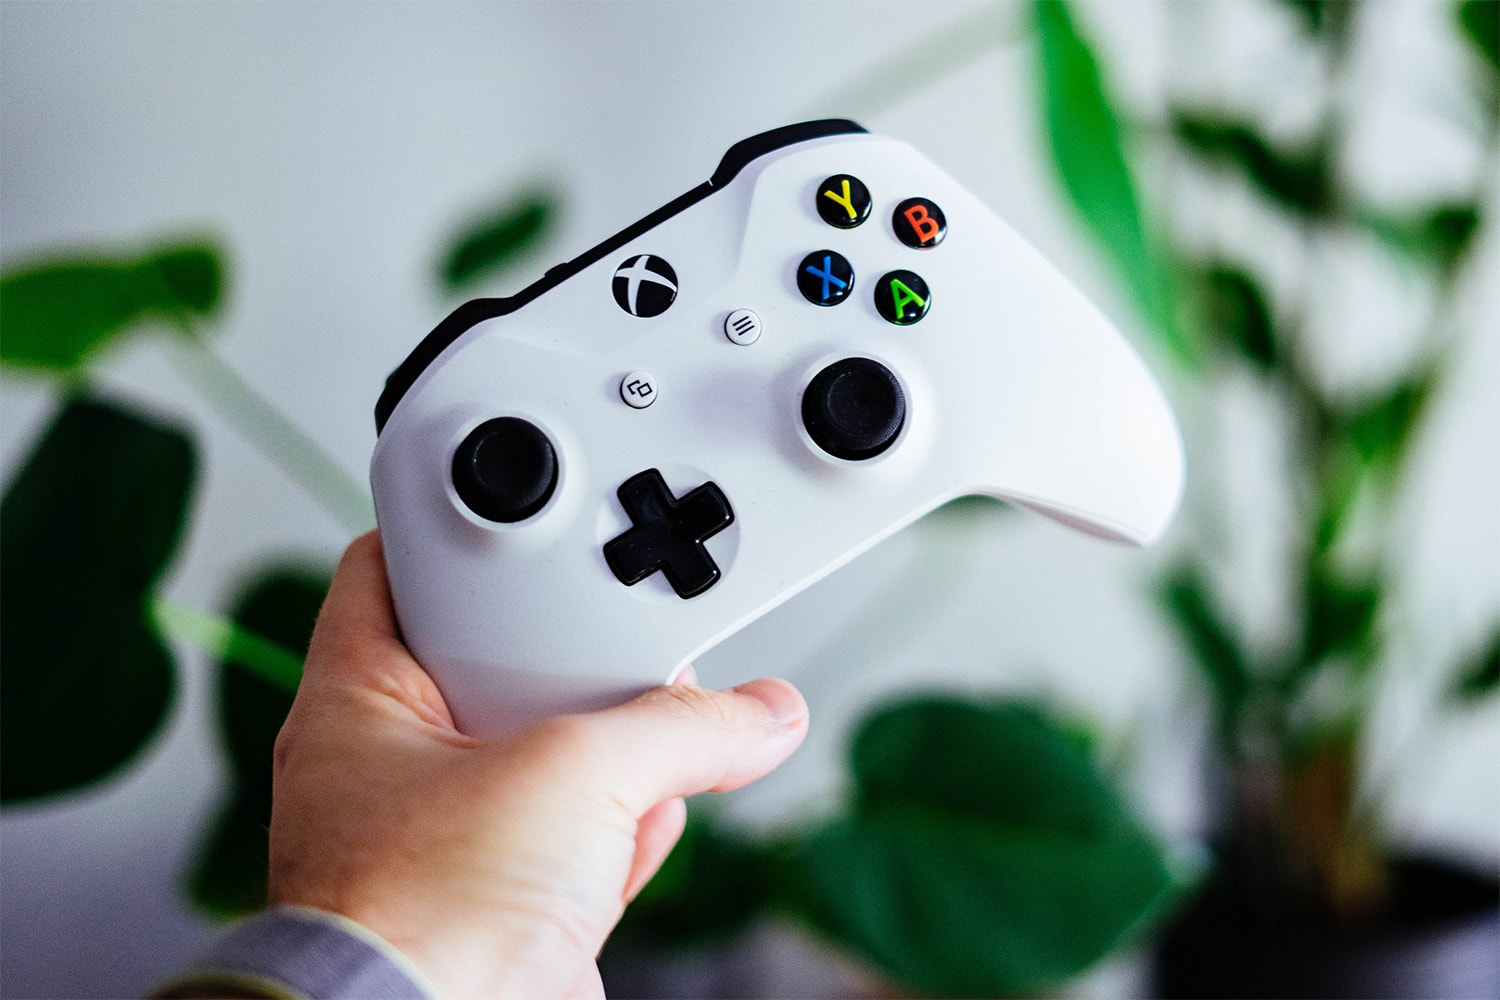 Gamers Are Going Crazy Over This Xbox Controller-Shaped Rock @cbr6w Playstation 5 PS5 Gaming News twitter tweet 